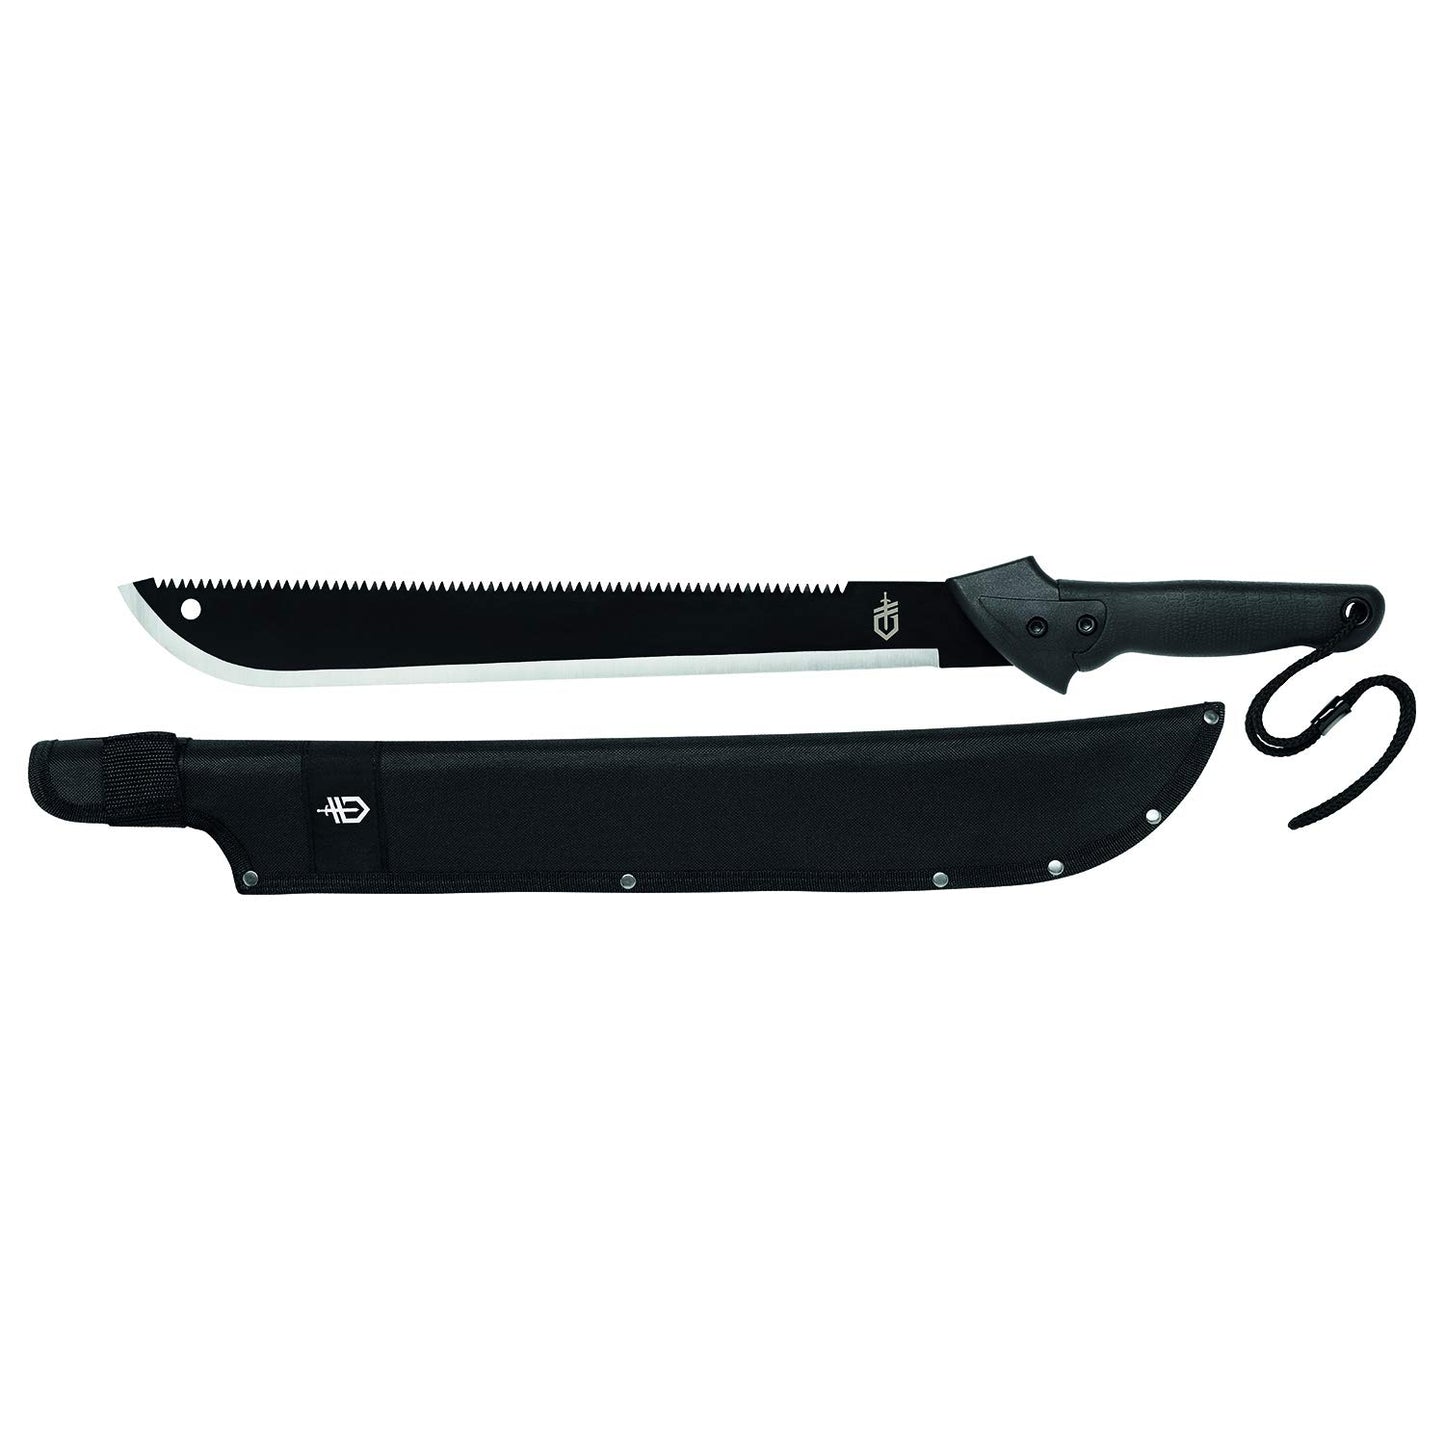 Gerber Gear Gator Machete - 25" Dual-Purpose Gardening Machete Knife for Chopping and Sawing - Includes Protective Sheath - Black, Recyclable Packaging